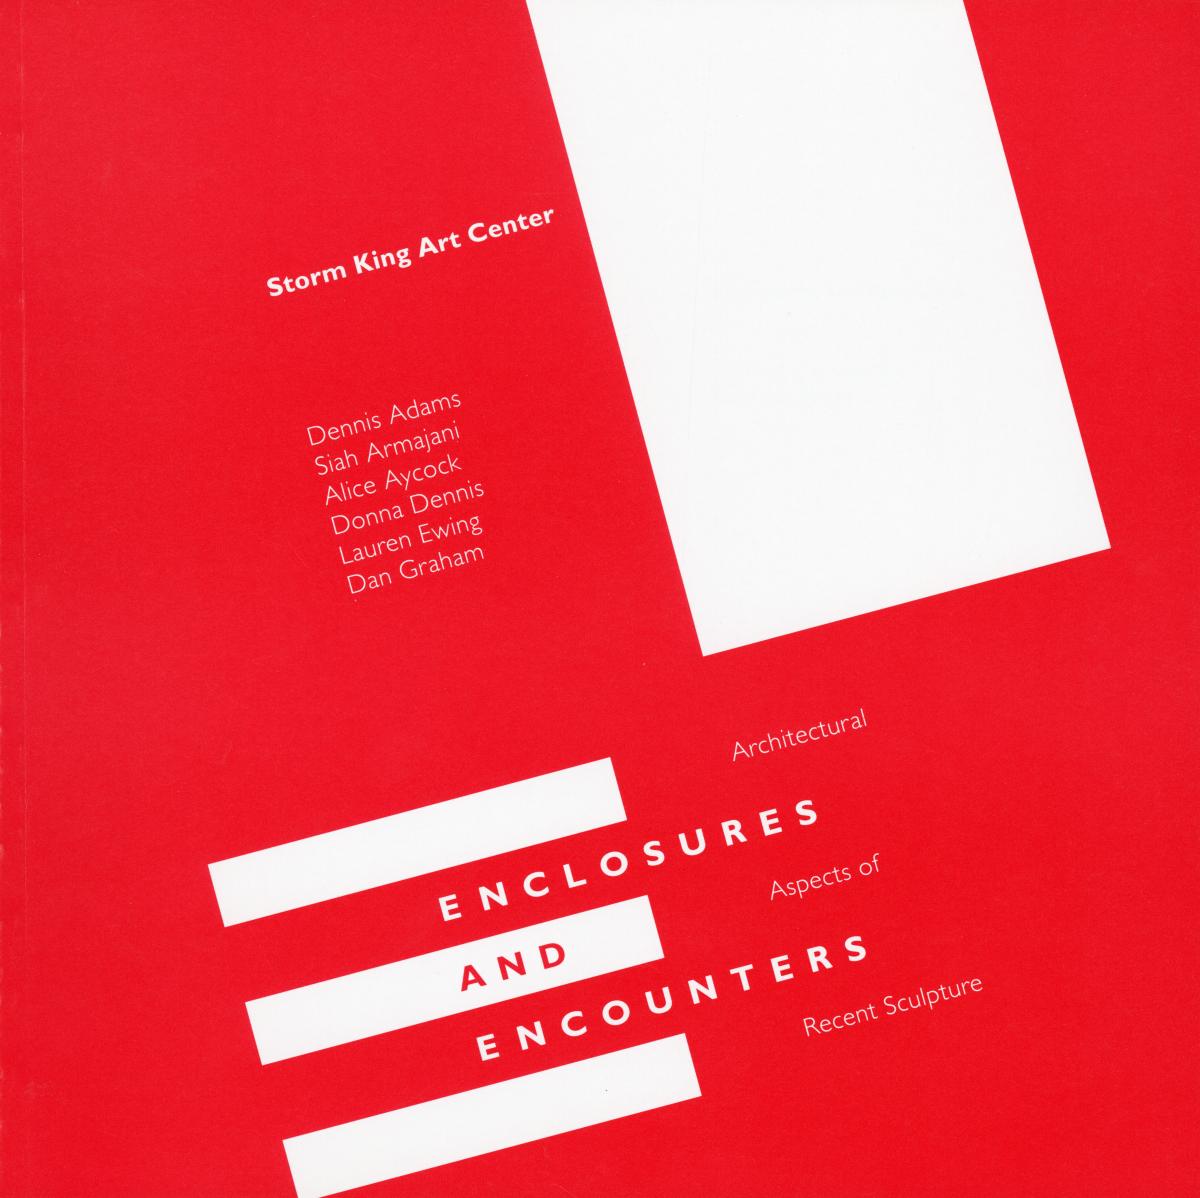 Enclosures and Encounters: Architectural Aspects of Recent Sculpture, May 20 - October 31, 1991, catalogue cover